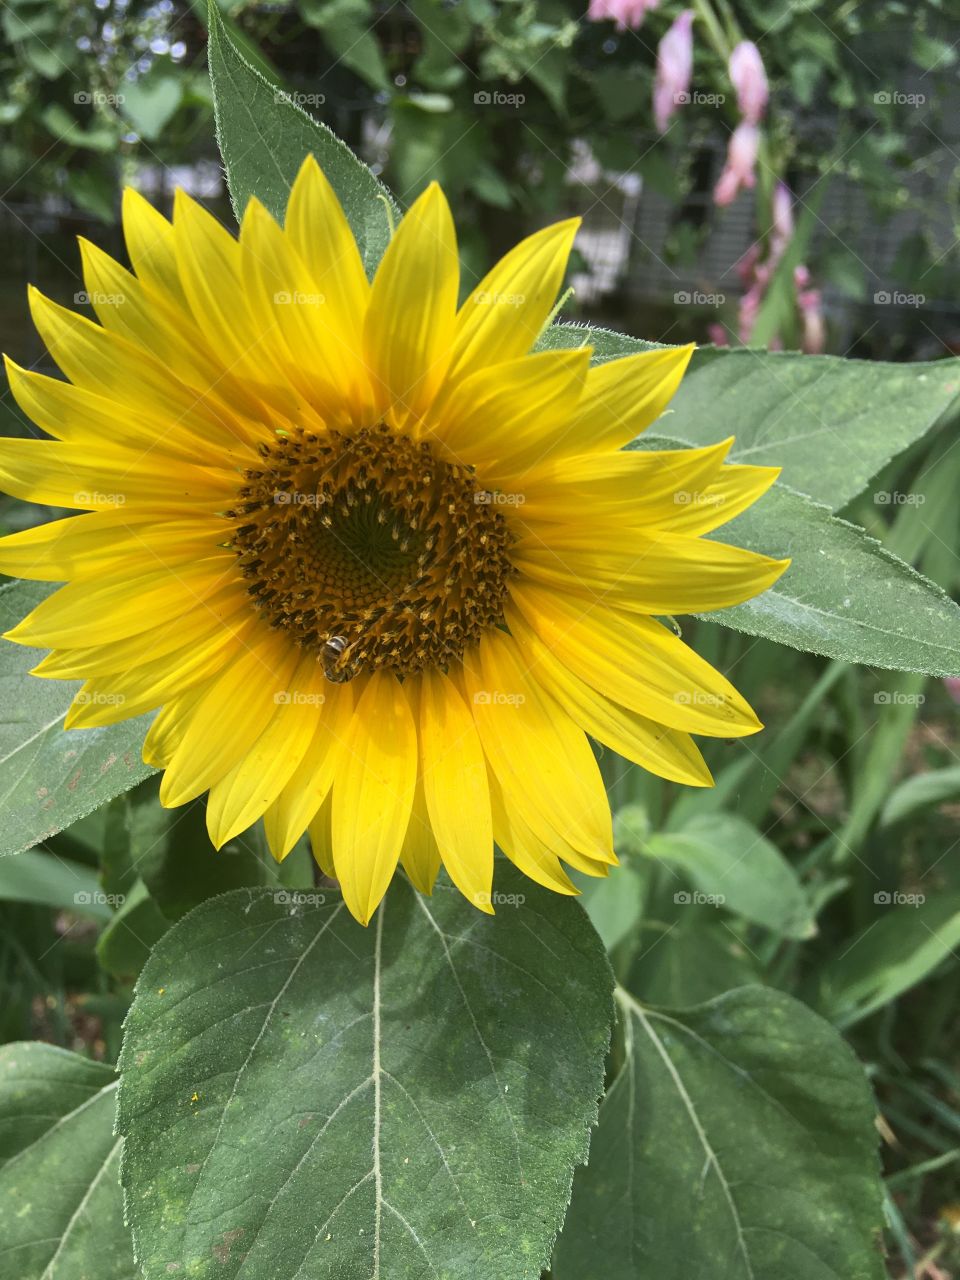 This pretty sunflower has popped up in one of my flower beds. Don’t know what variety it is.